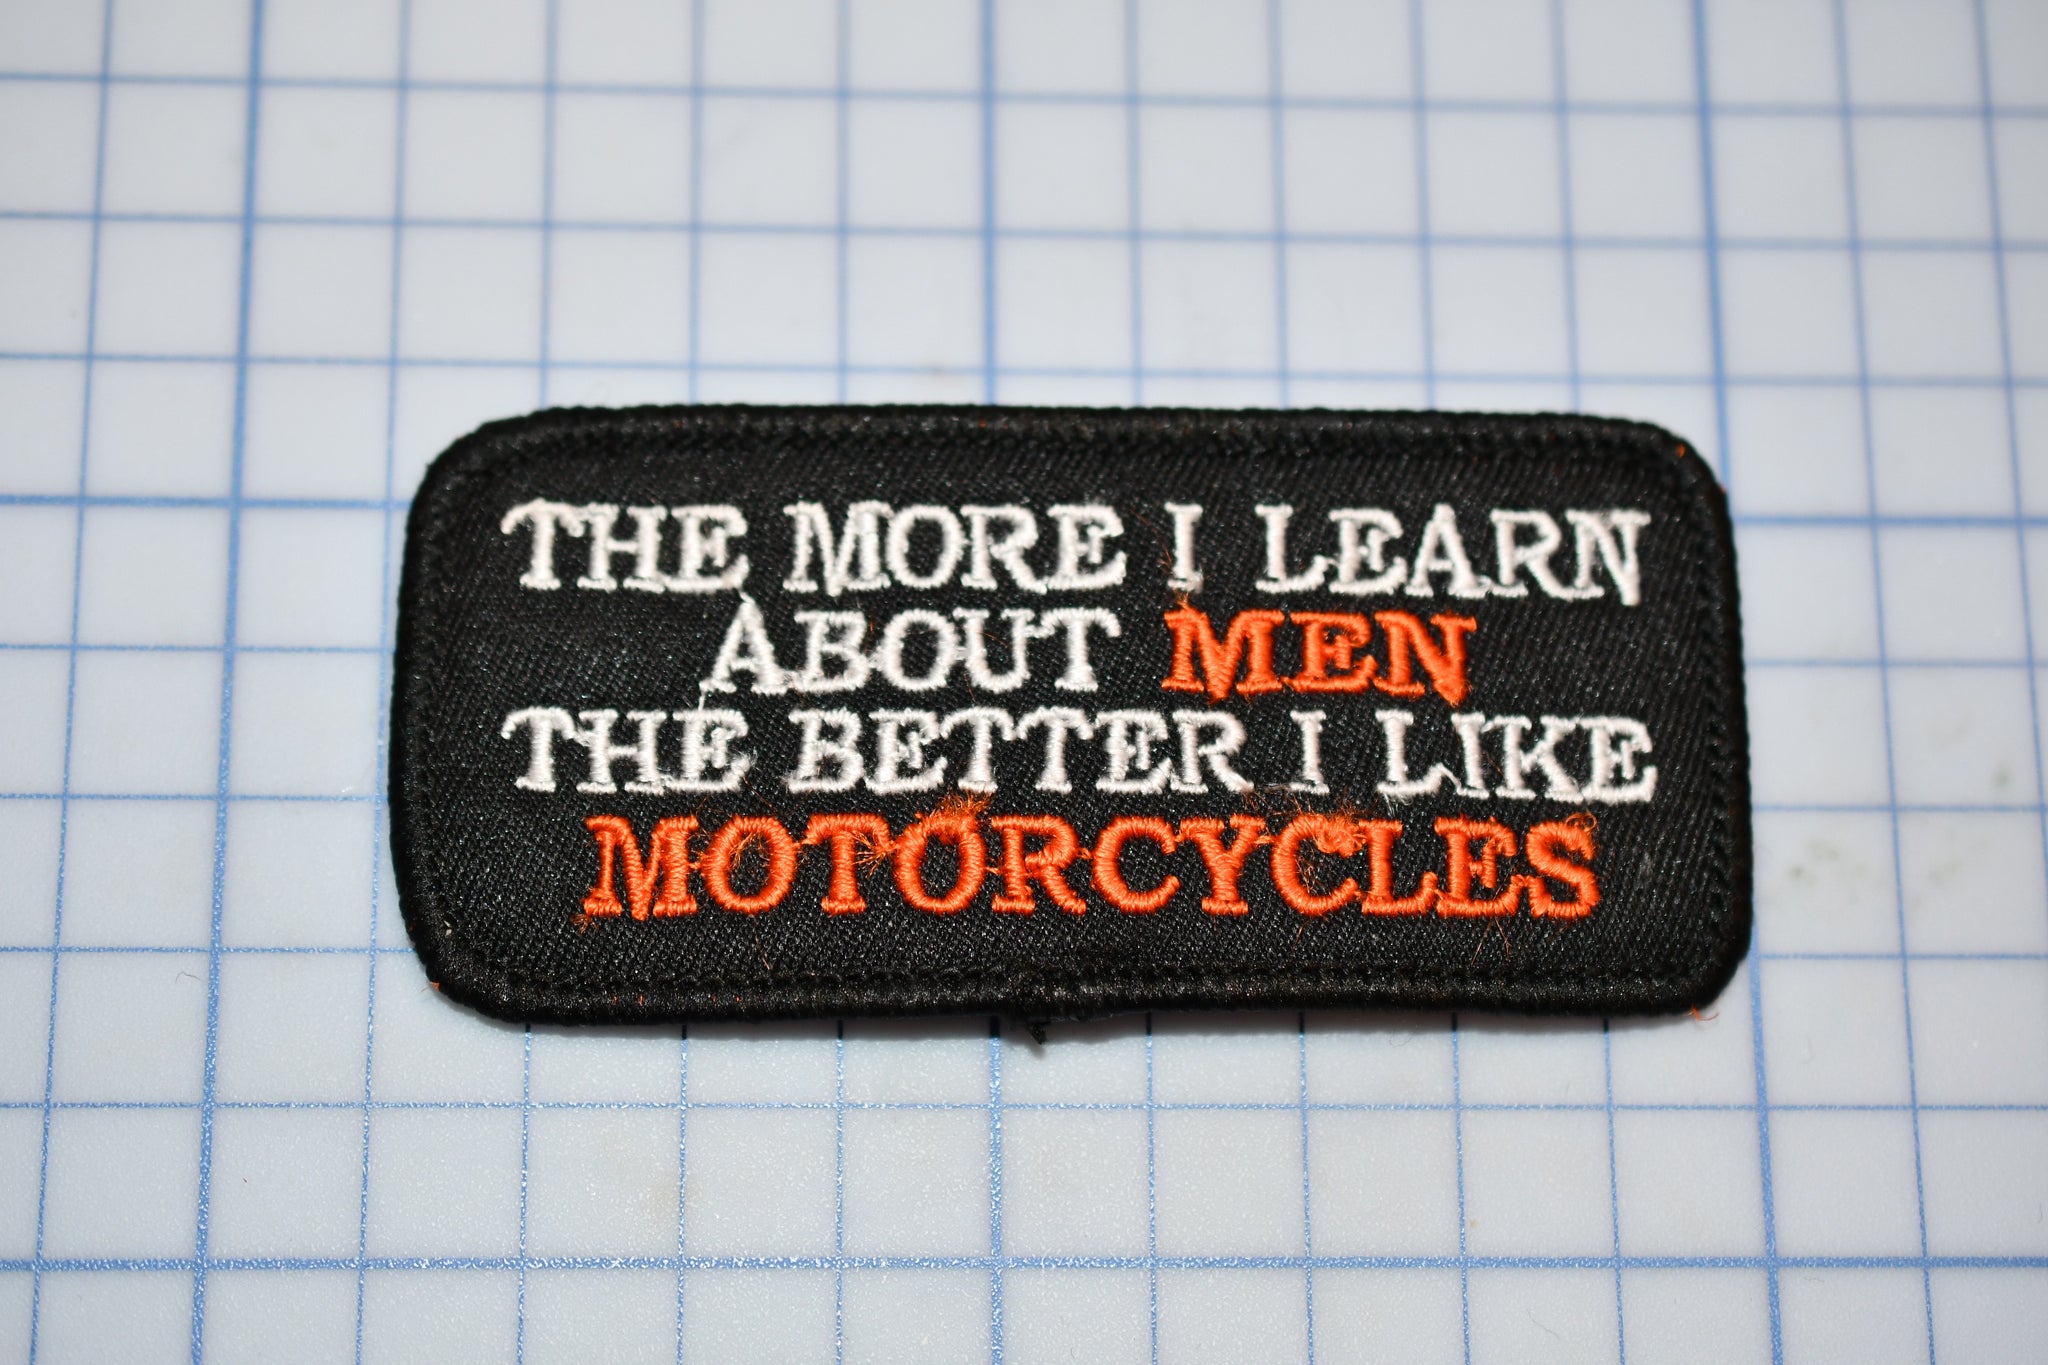 "The More I Learn About Men The Better I Like Motorcycles" Sew On Biker Patch (B30-365)